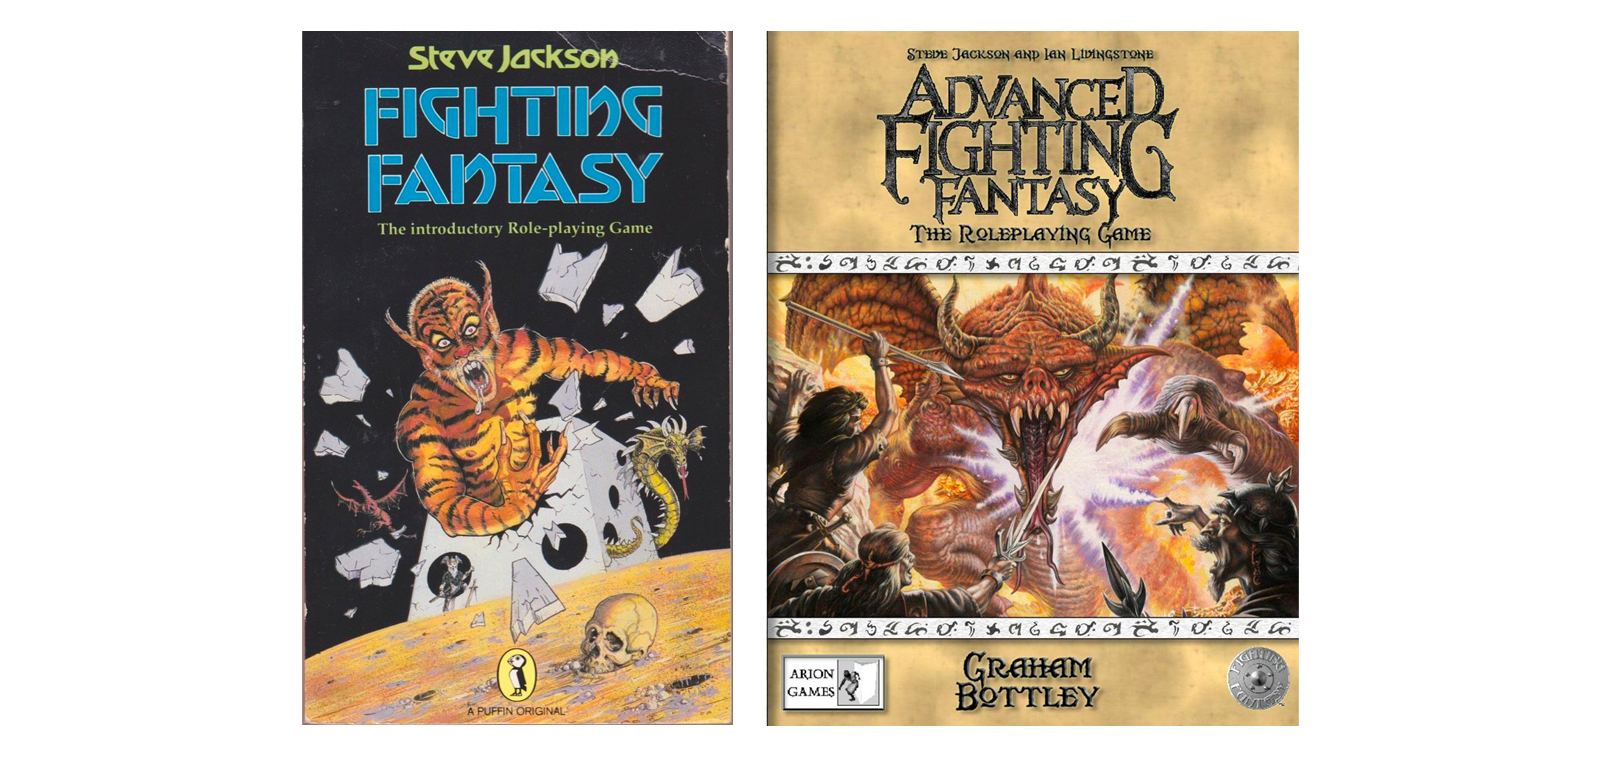 Fighting Fantasy RPG and Advanced Fighting Fantasy RPG